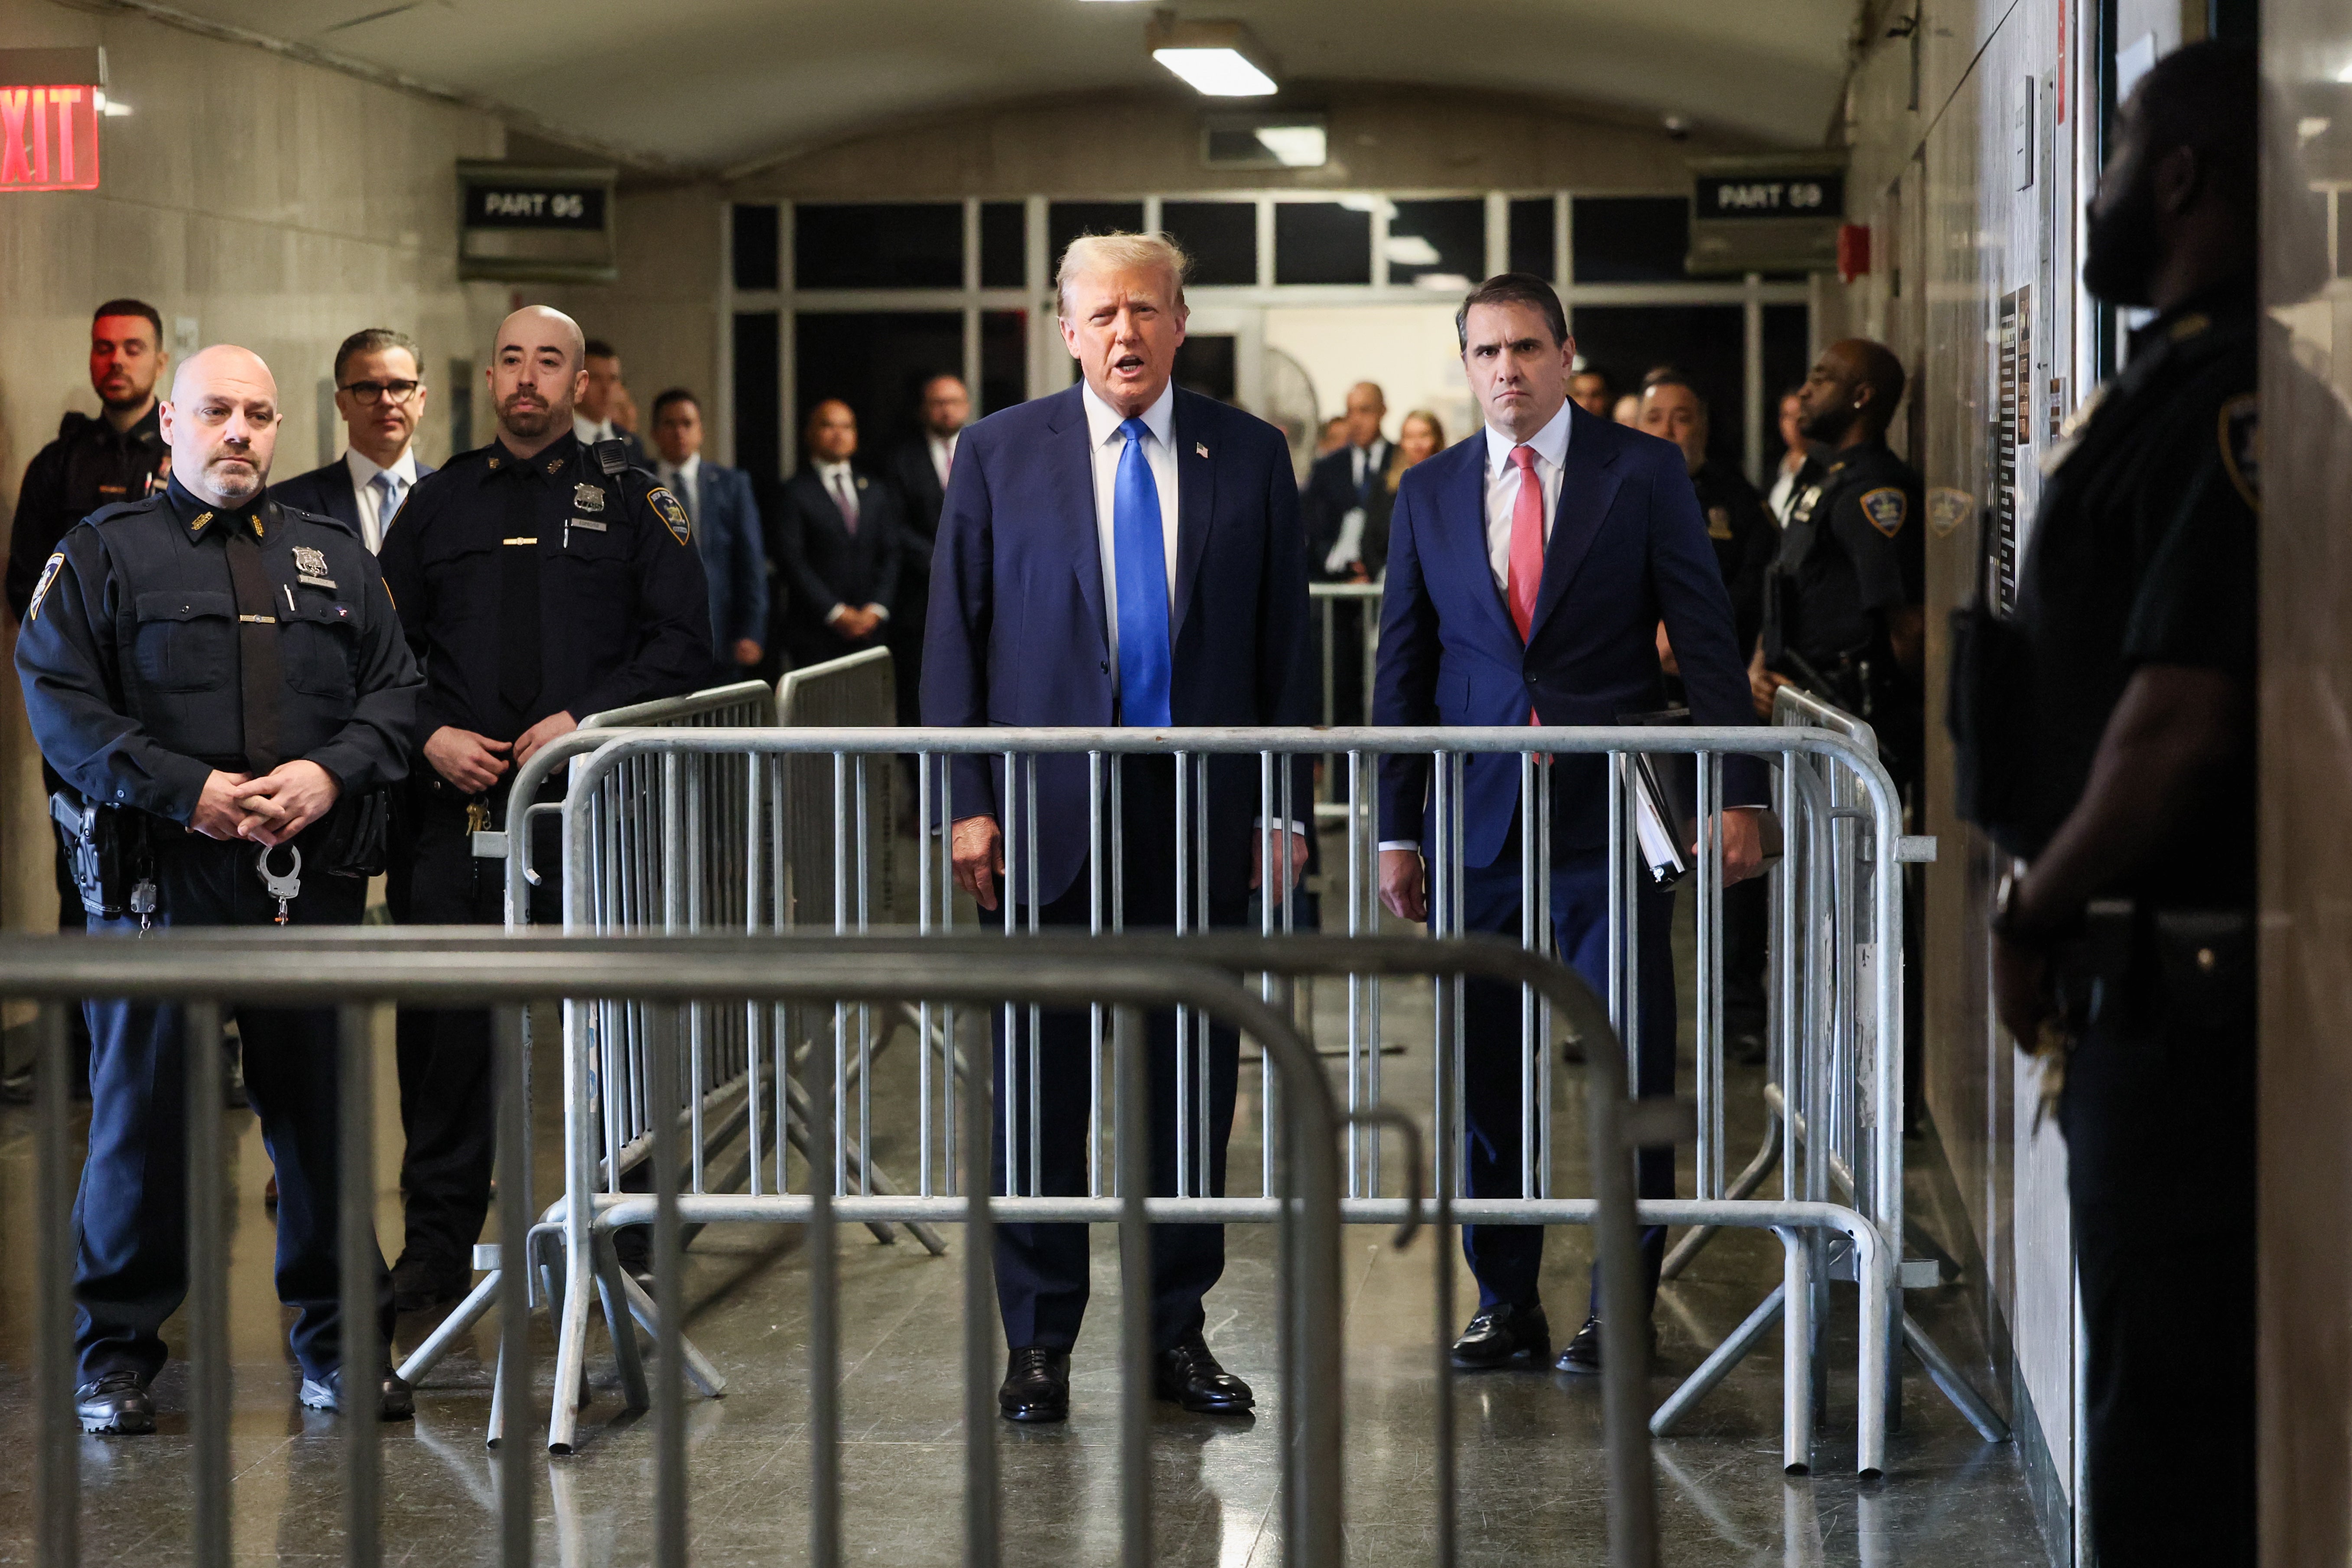 Donald Trump speaks to reporters from a Manhattan criminal court hallway on 22 April